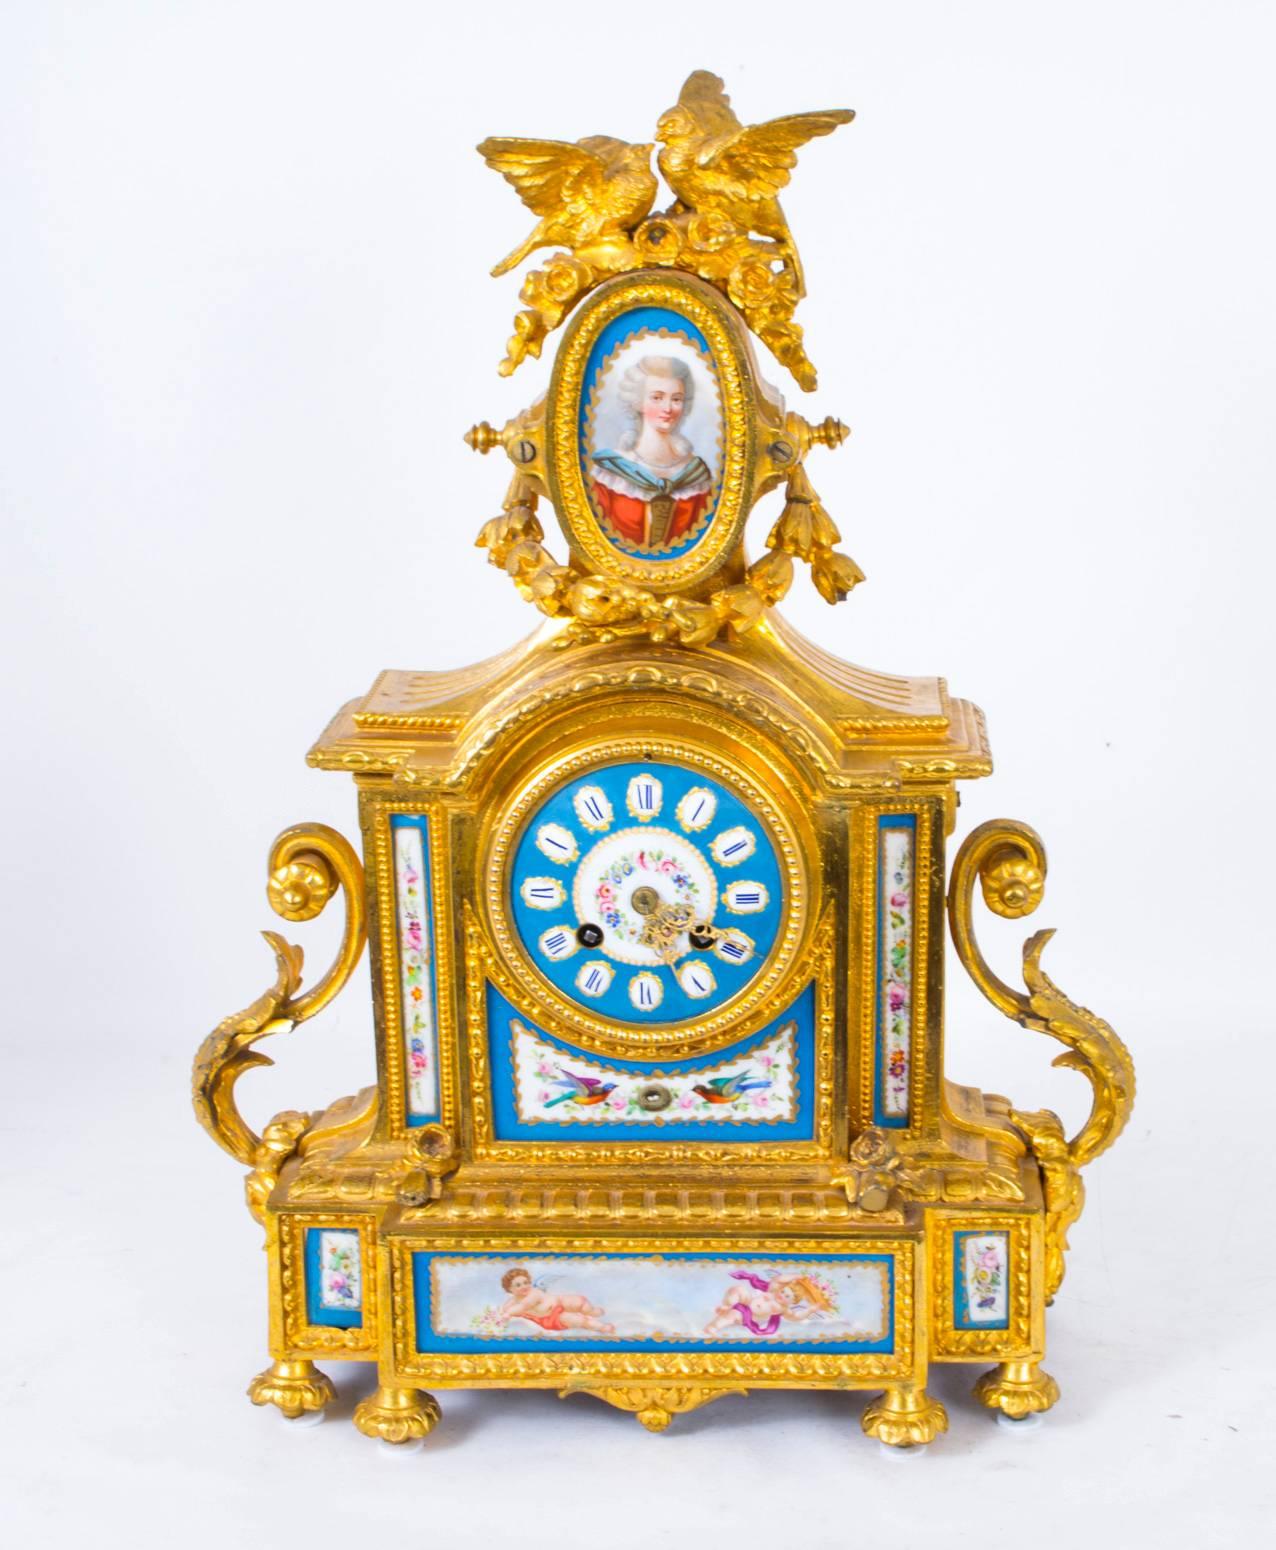 This is a beautiful antique French ormolu and Sèvres Porcelain porcelain mantel clock, striking the hours and half hours and circa 1860 in date.

It is set within a beautiful ormolu Baroque case that is surmounted by garlands and doves, and set